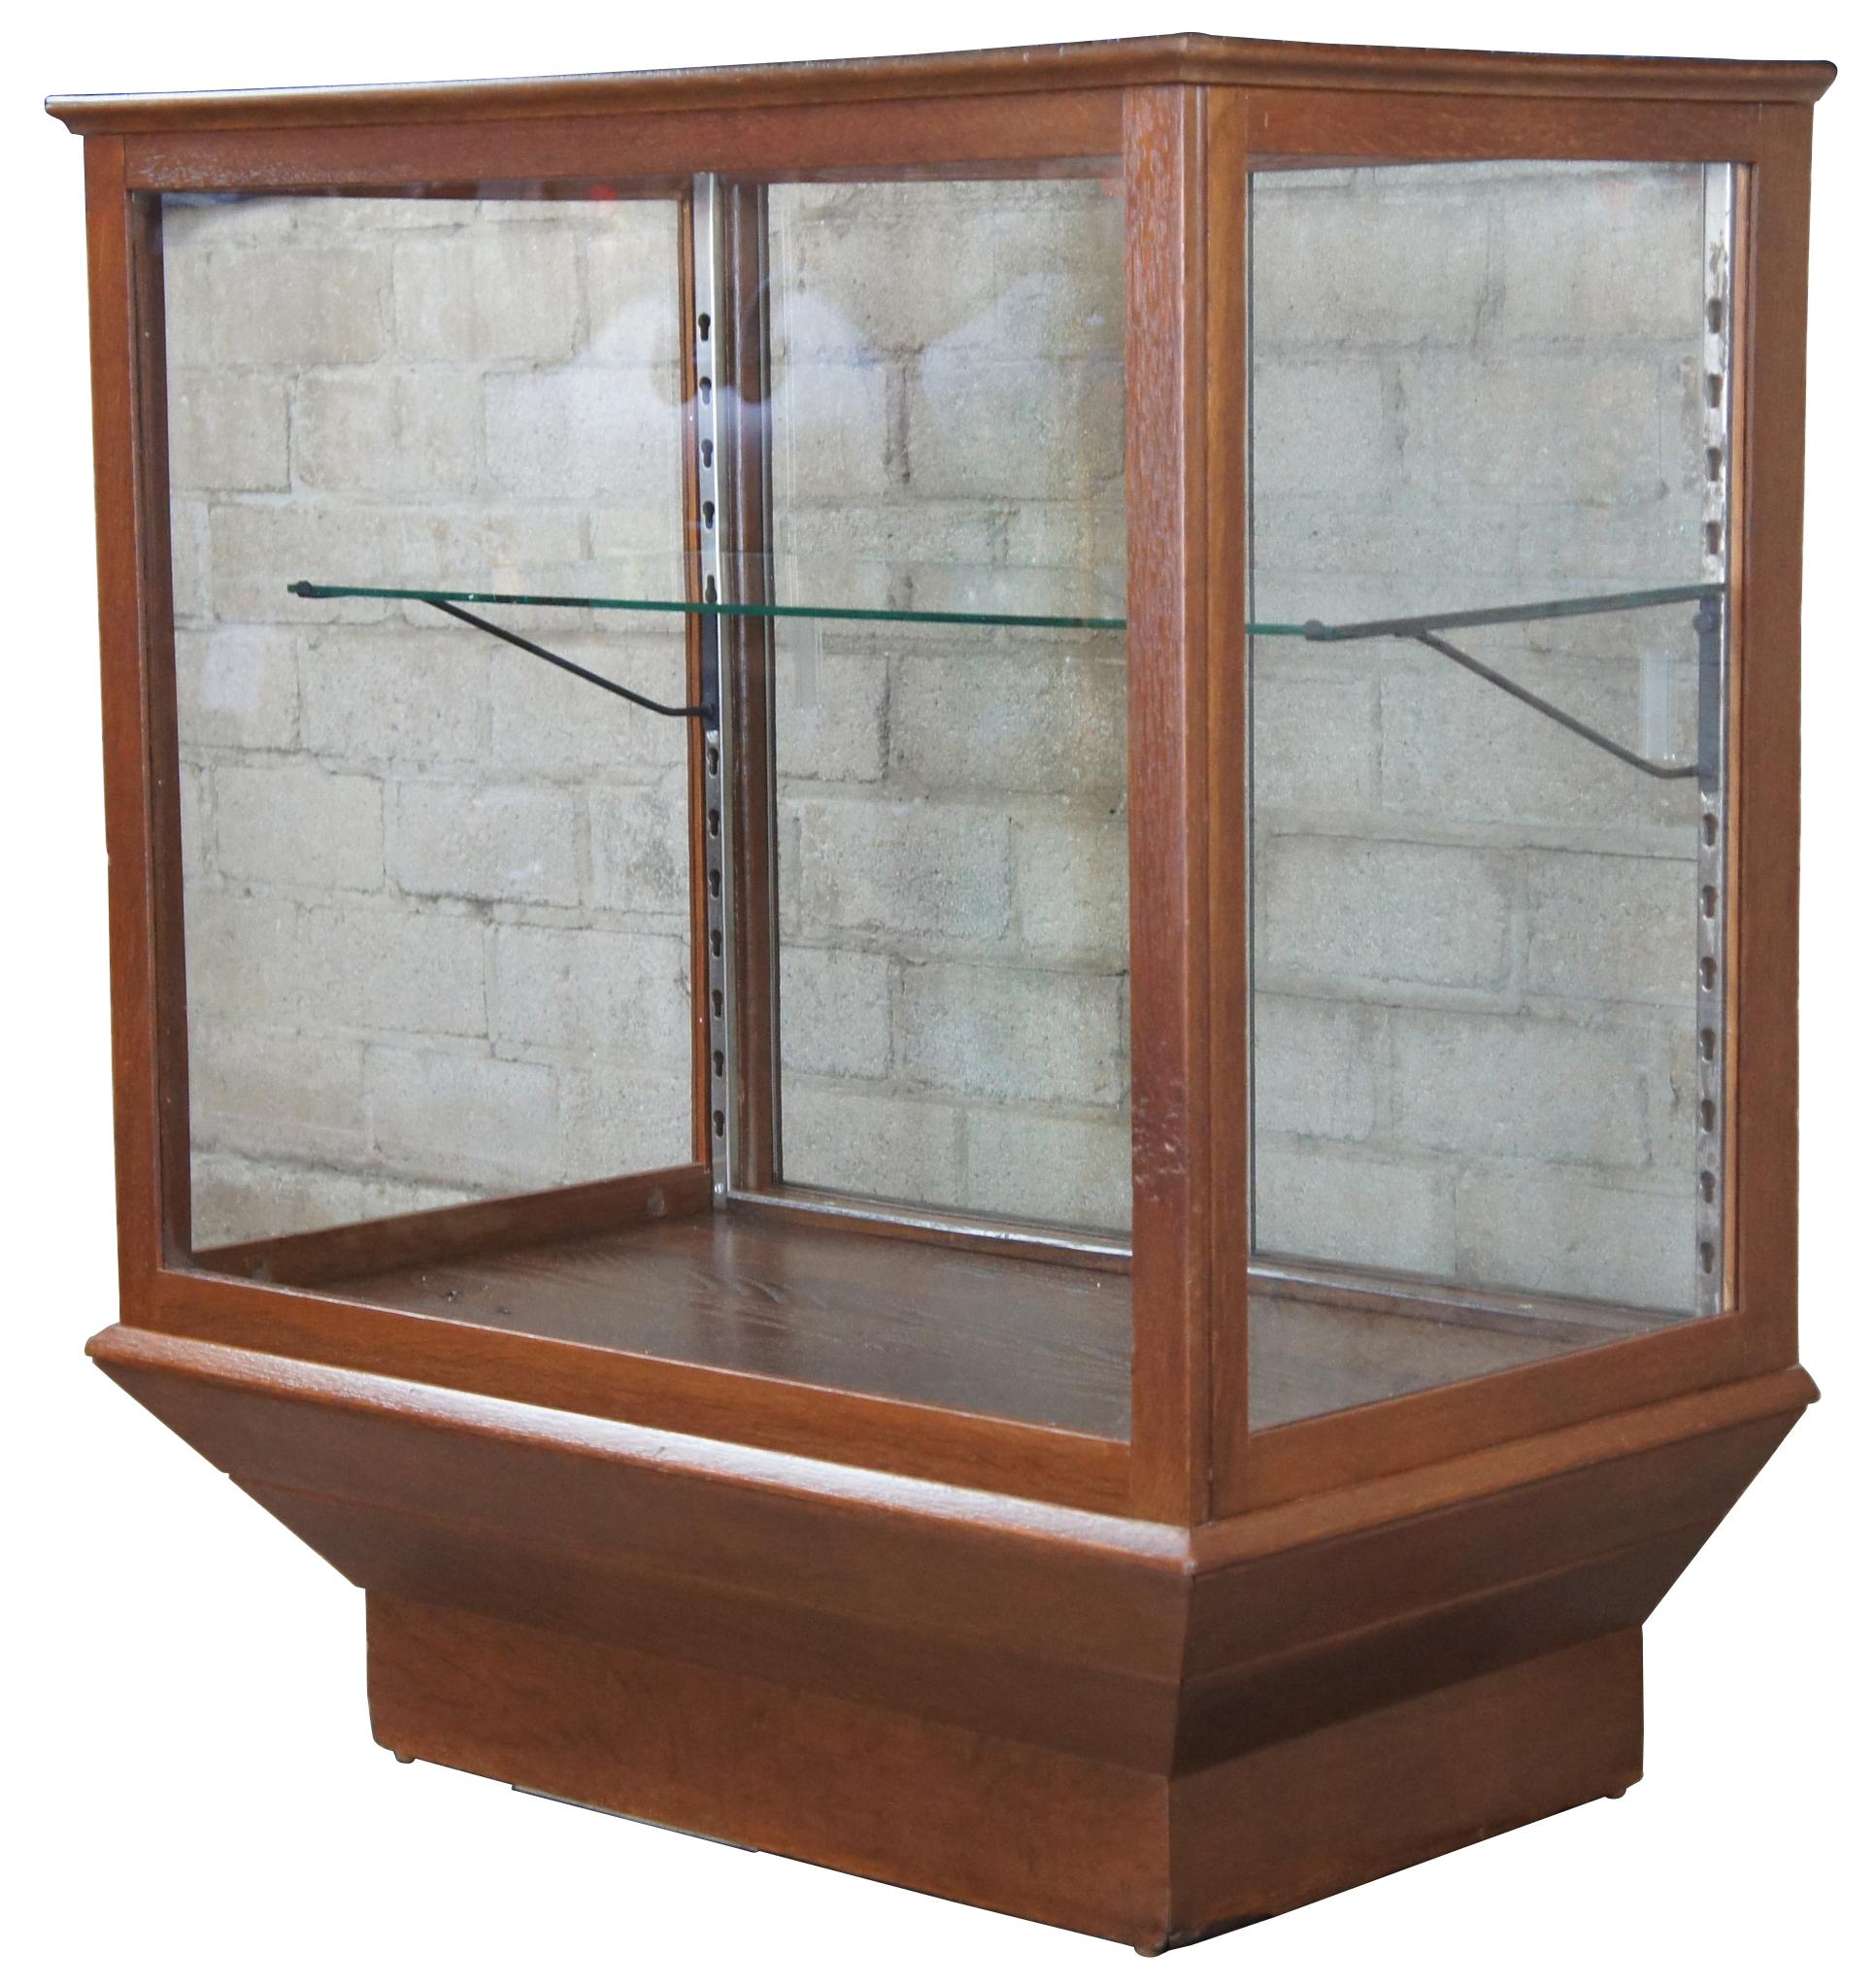 Vintage oak general store curio display showcase. Features pedestal base with one adjustable shelf and two sliding glass doors.
  